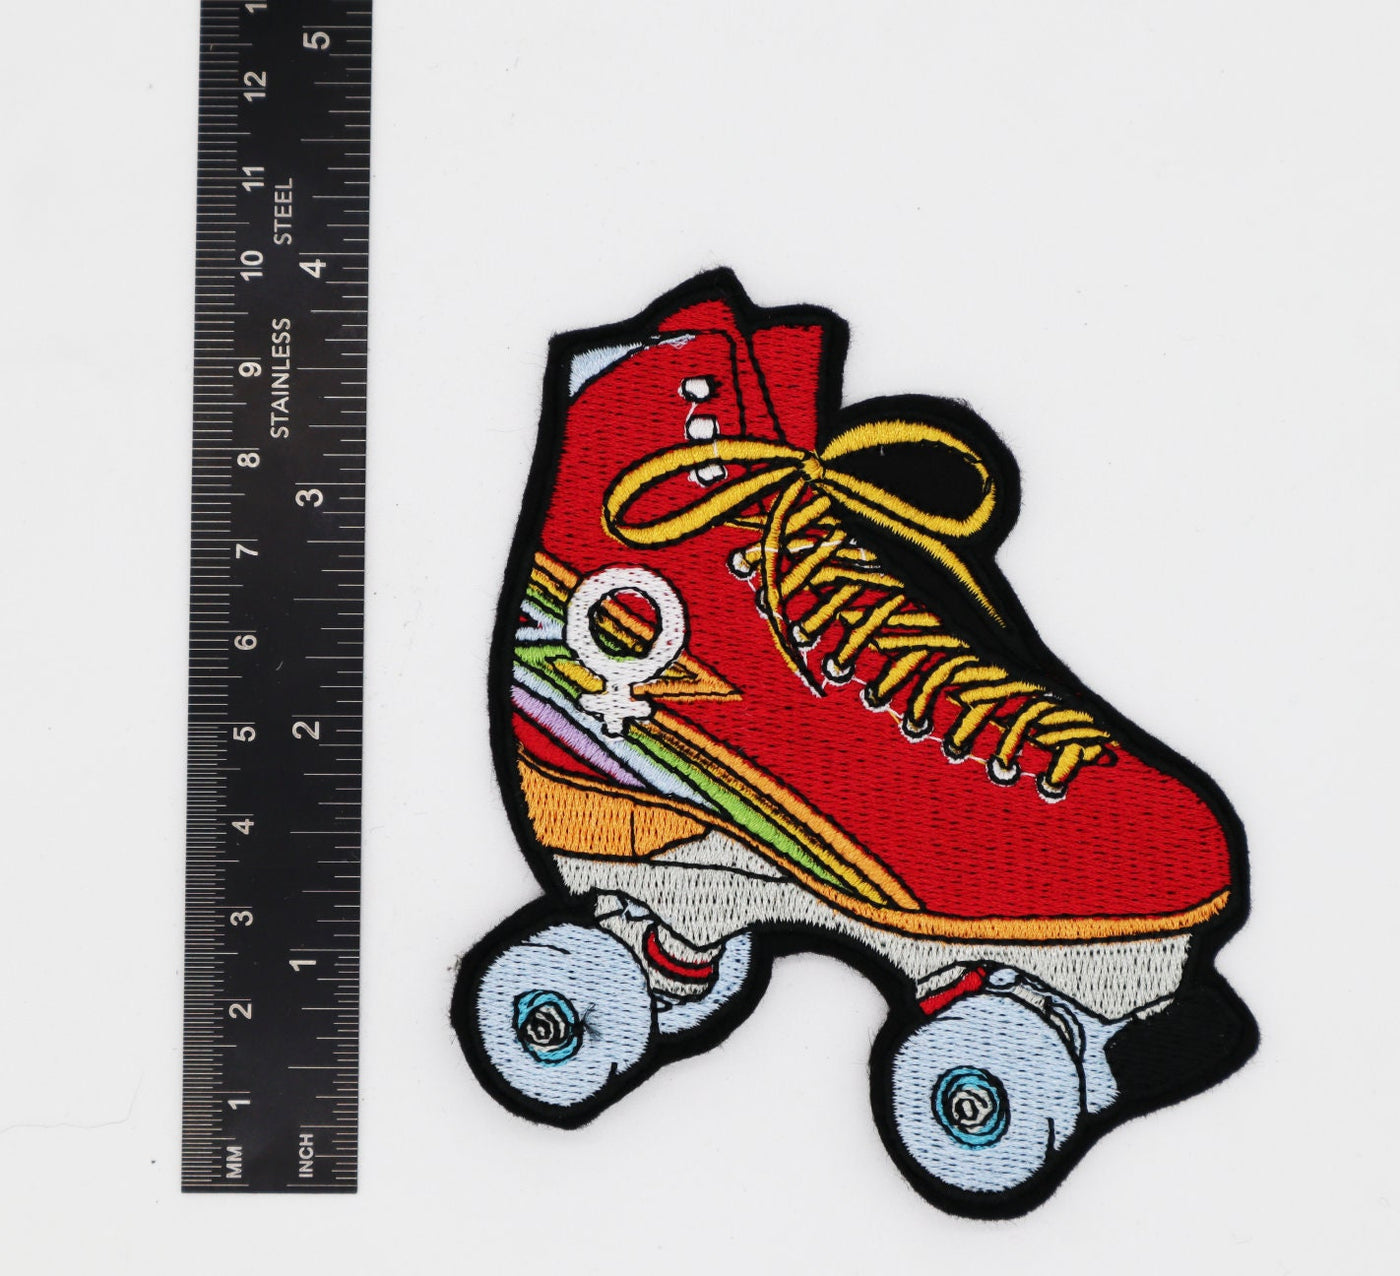 Rainbow Femme Empowerment Roller Skate Embroidered Patch